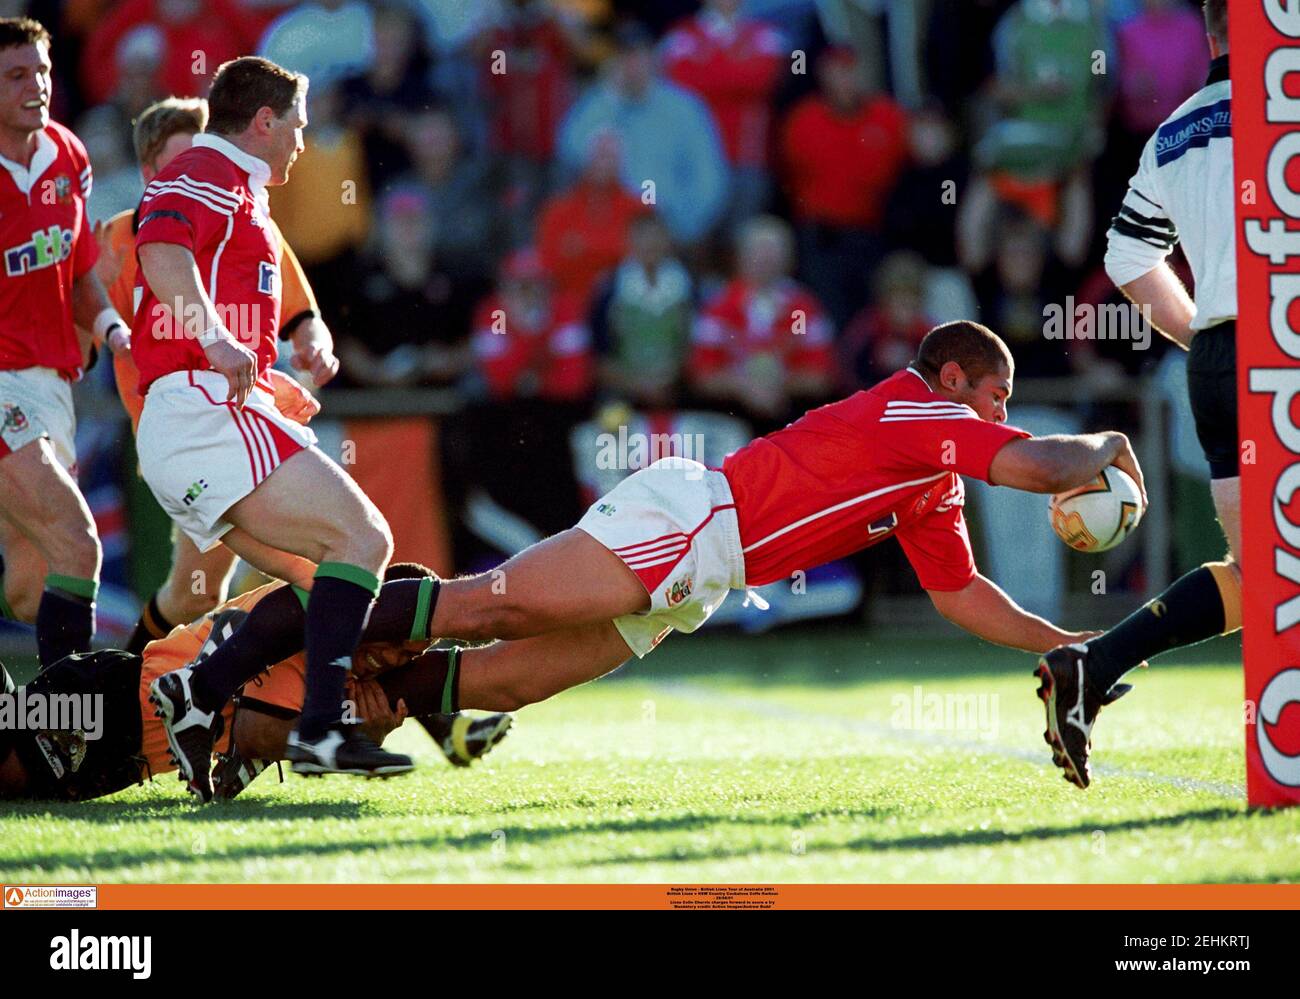 Rugby Union - British and Irish Lions Tour of Australia 2001  British and Irish Lions v NSW Country Cockatoos Coffs Harbour - 26/6/01  Lions Colin Charvis charges forward to score a try  Mandatory credit: Action Images/Andrew Budd Stock Photo